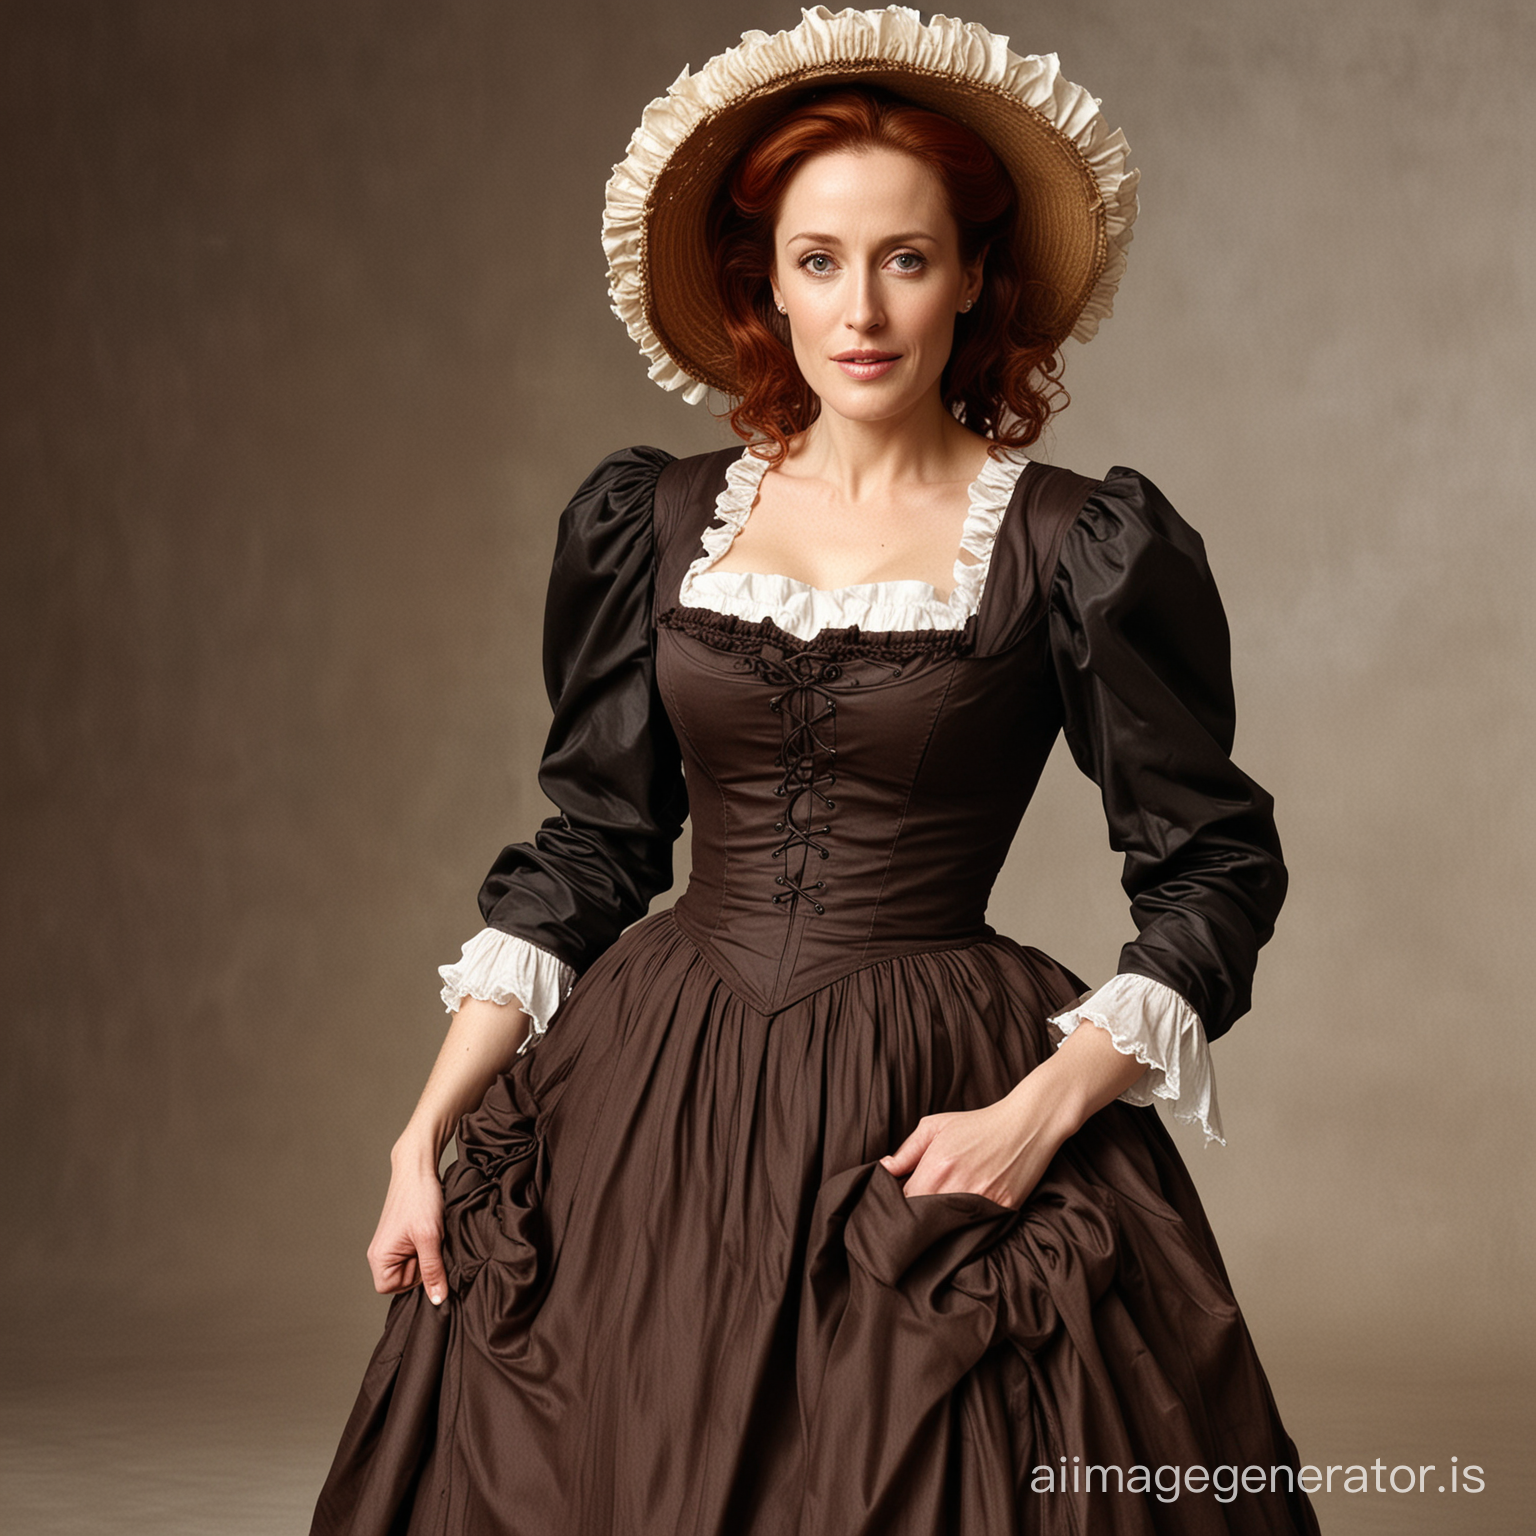 red haired Gillian Anderson dressed as an old west farmer's wife wearing a dark brown floor-length loose billowing old west poofy modest dress with layers of petticoats a long apron and a frilly bonnet hand in hand with an old farmer dressed into a black suit who seems to be her newlywed husband